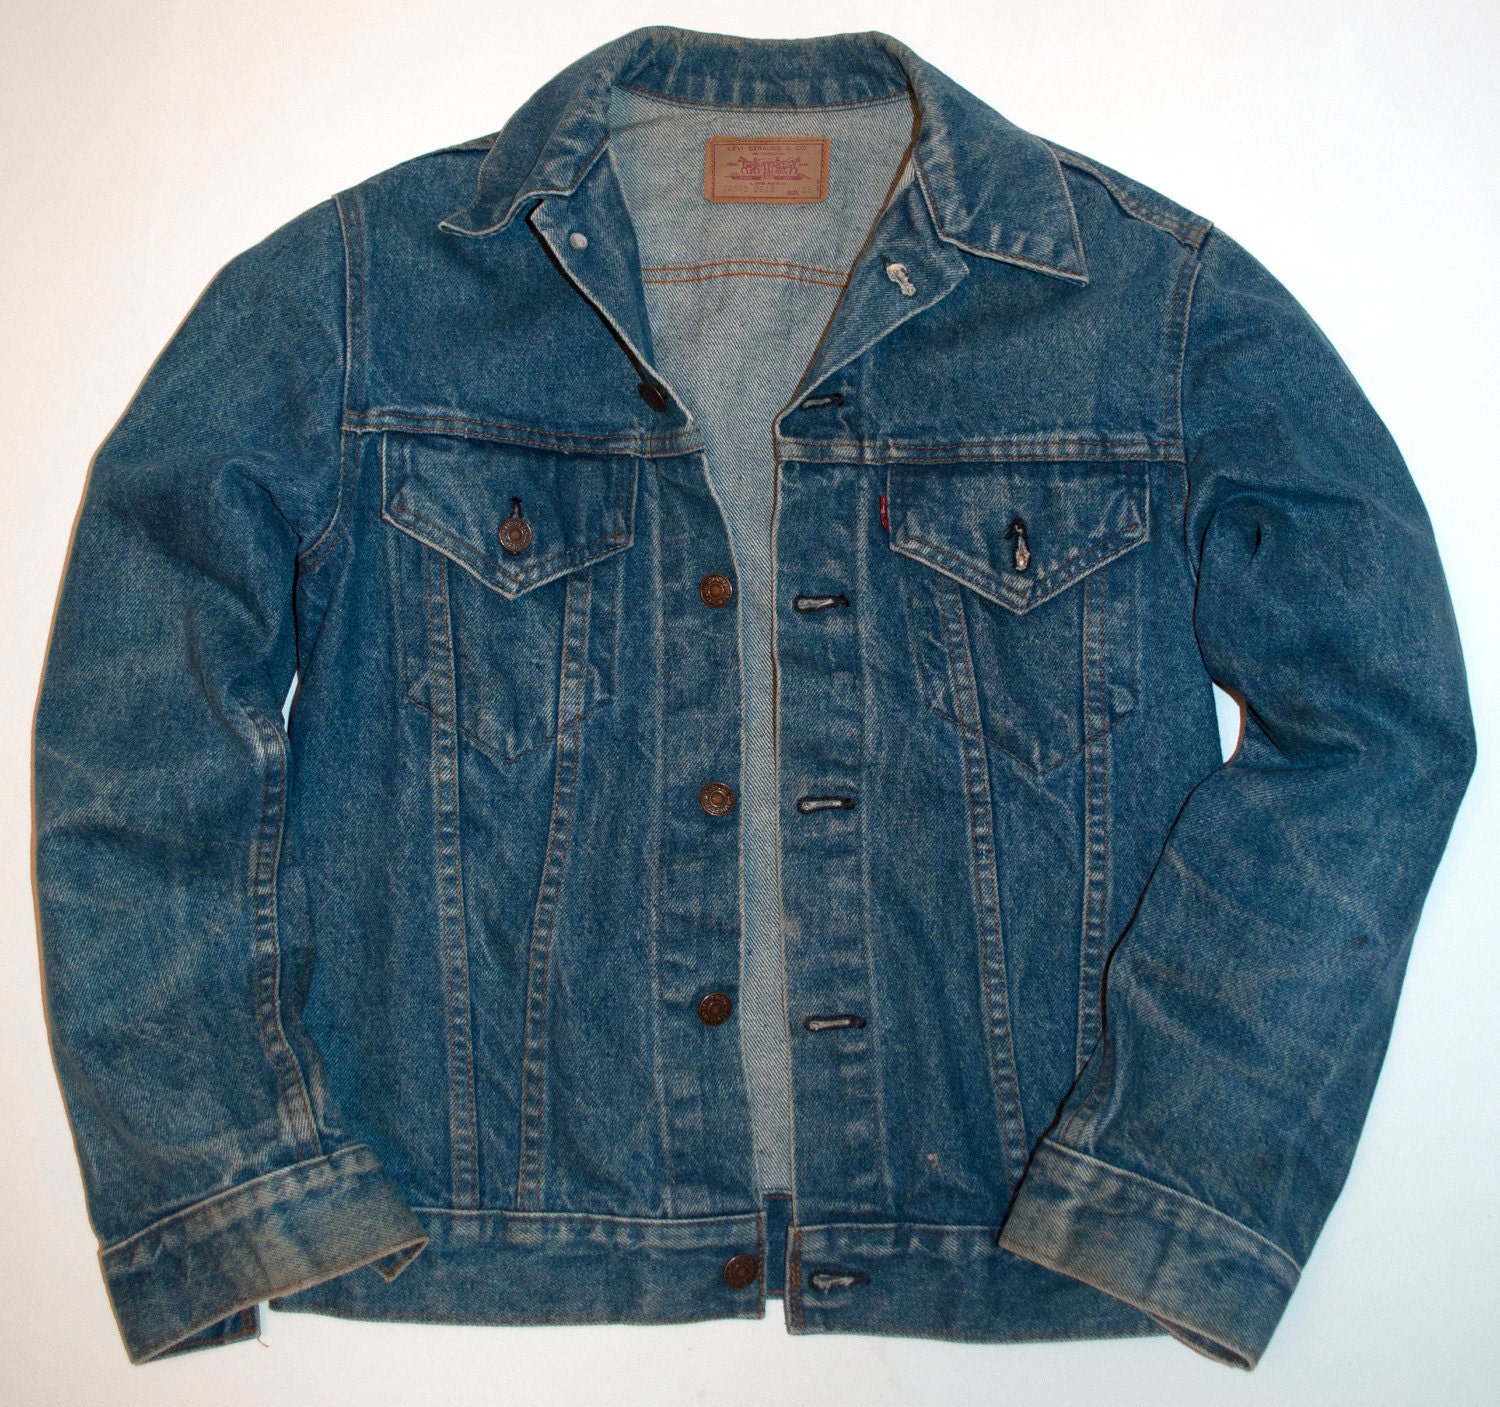 Levi's Denim Jacket - Made in The U.S.A.